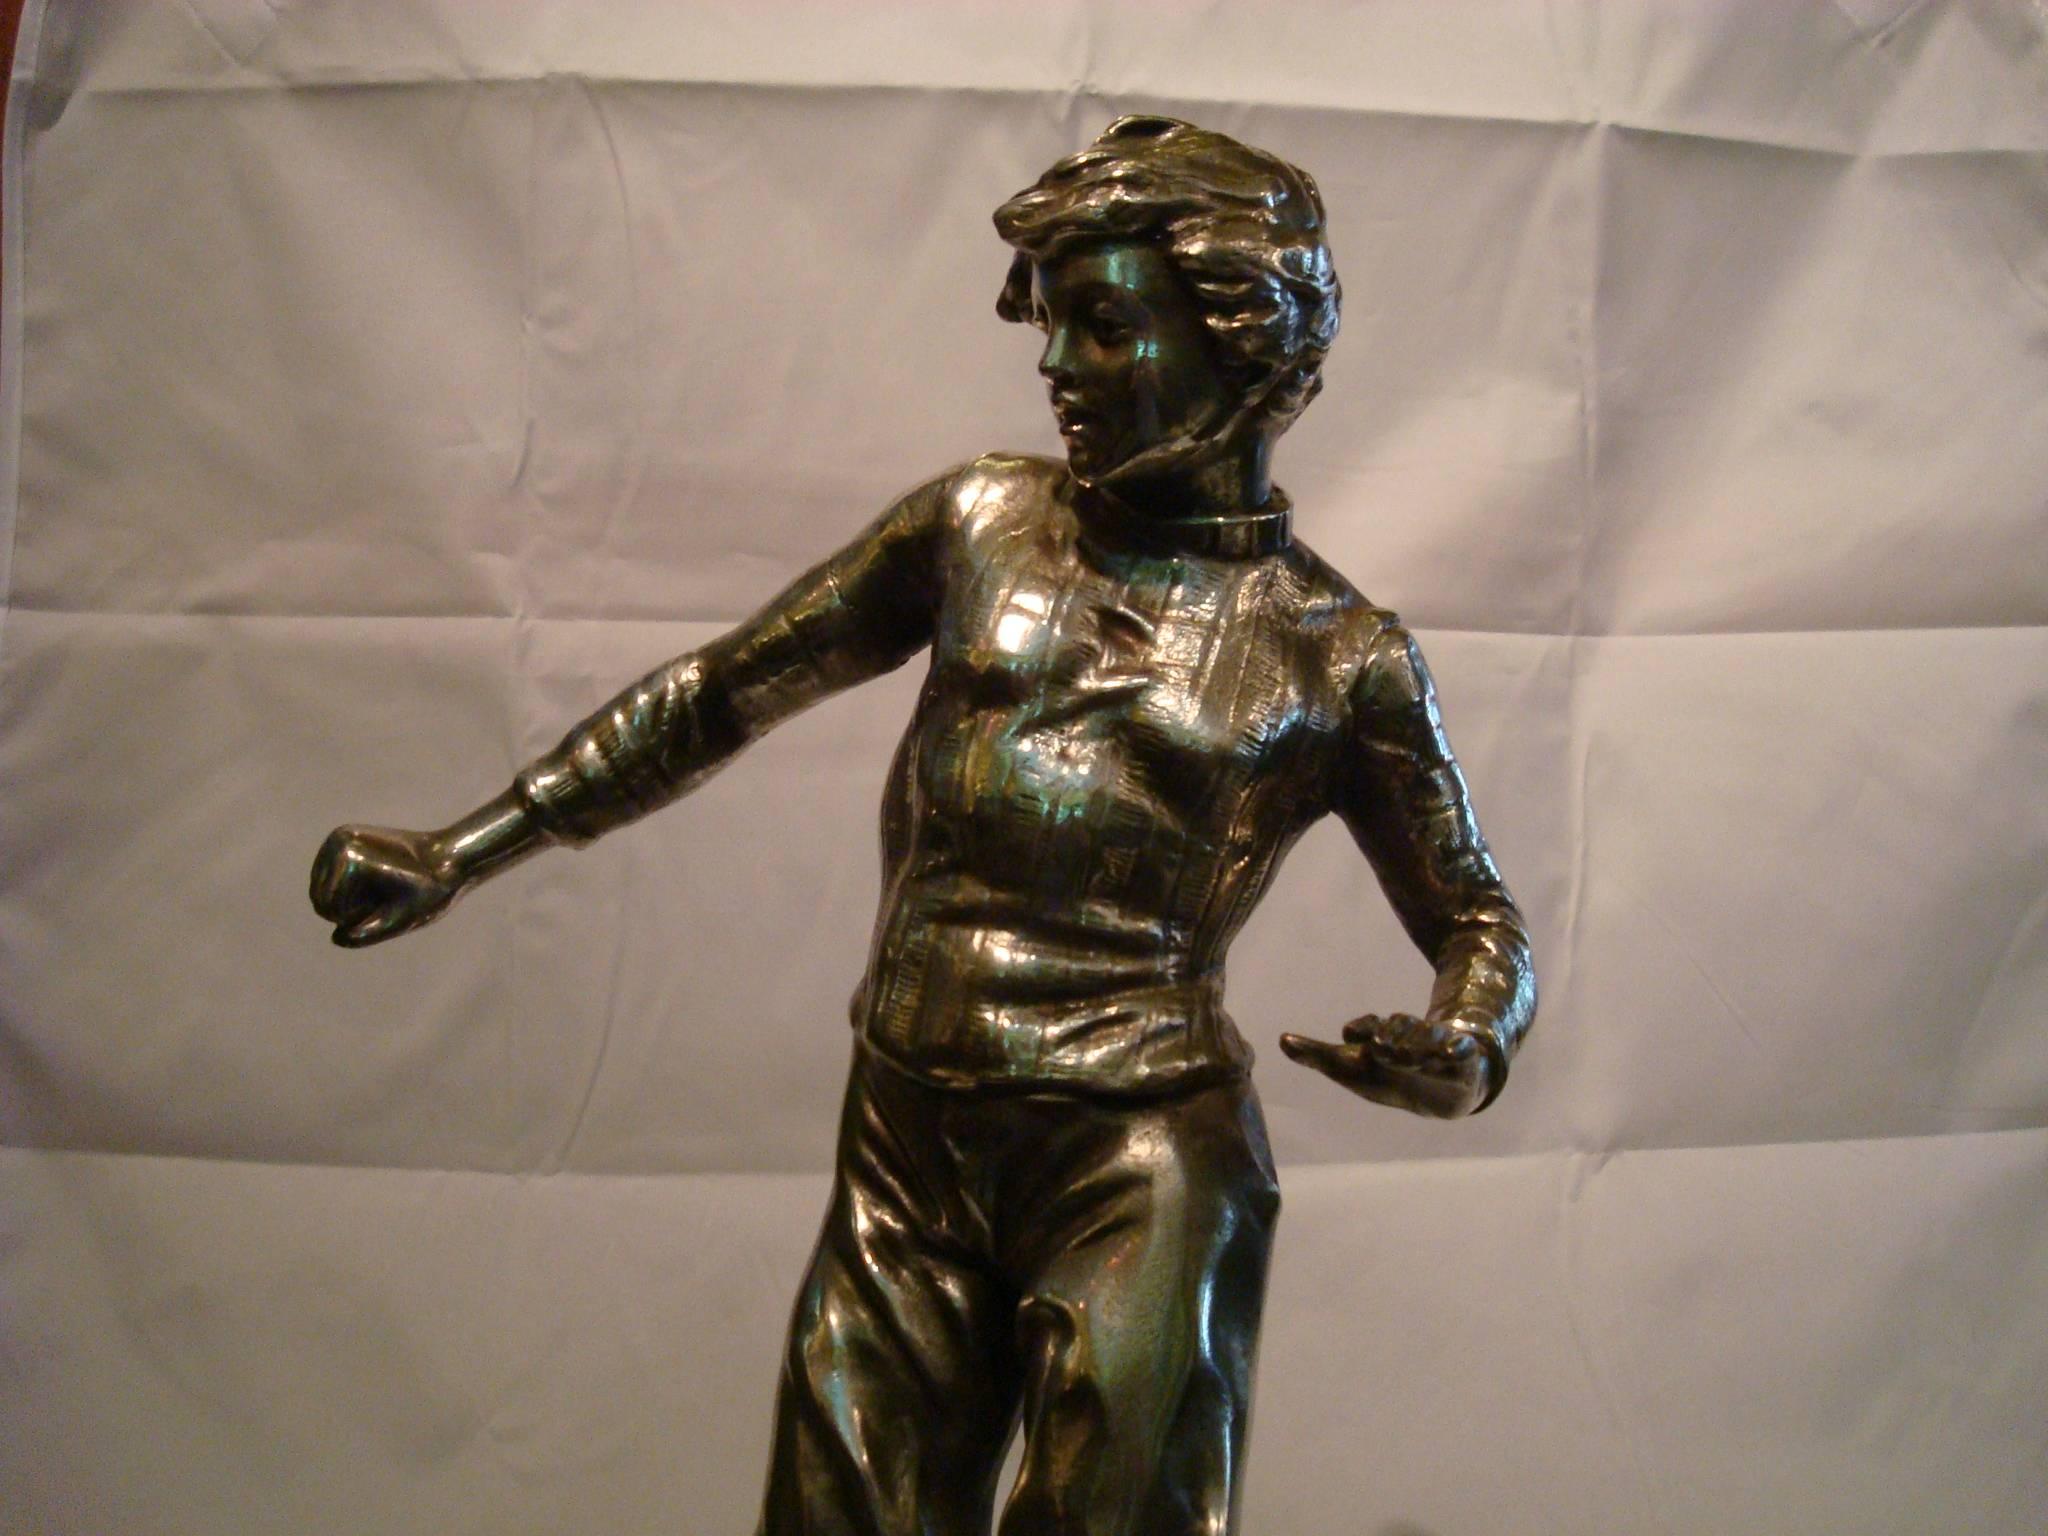 Early 20th Century Soccer or Football player Figure, Sculpture or Trophy, France, 1920s